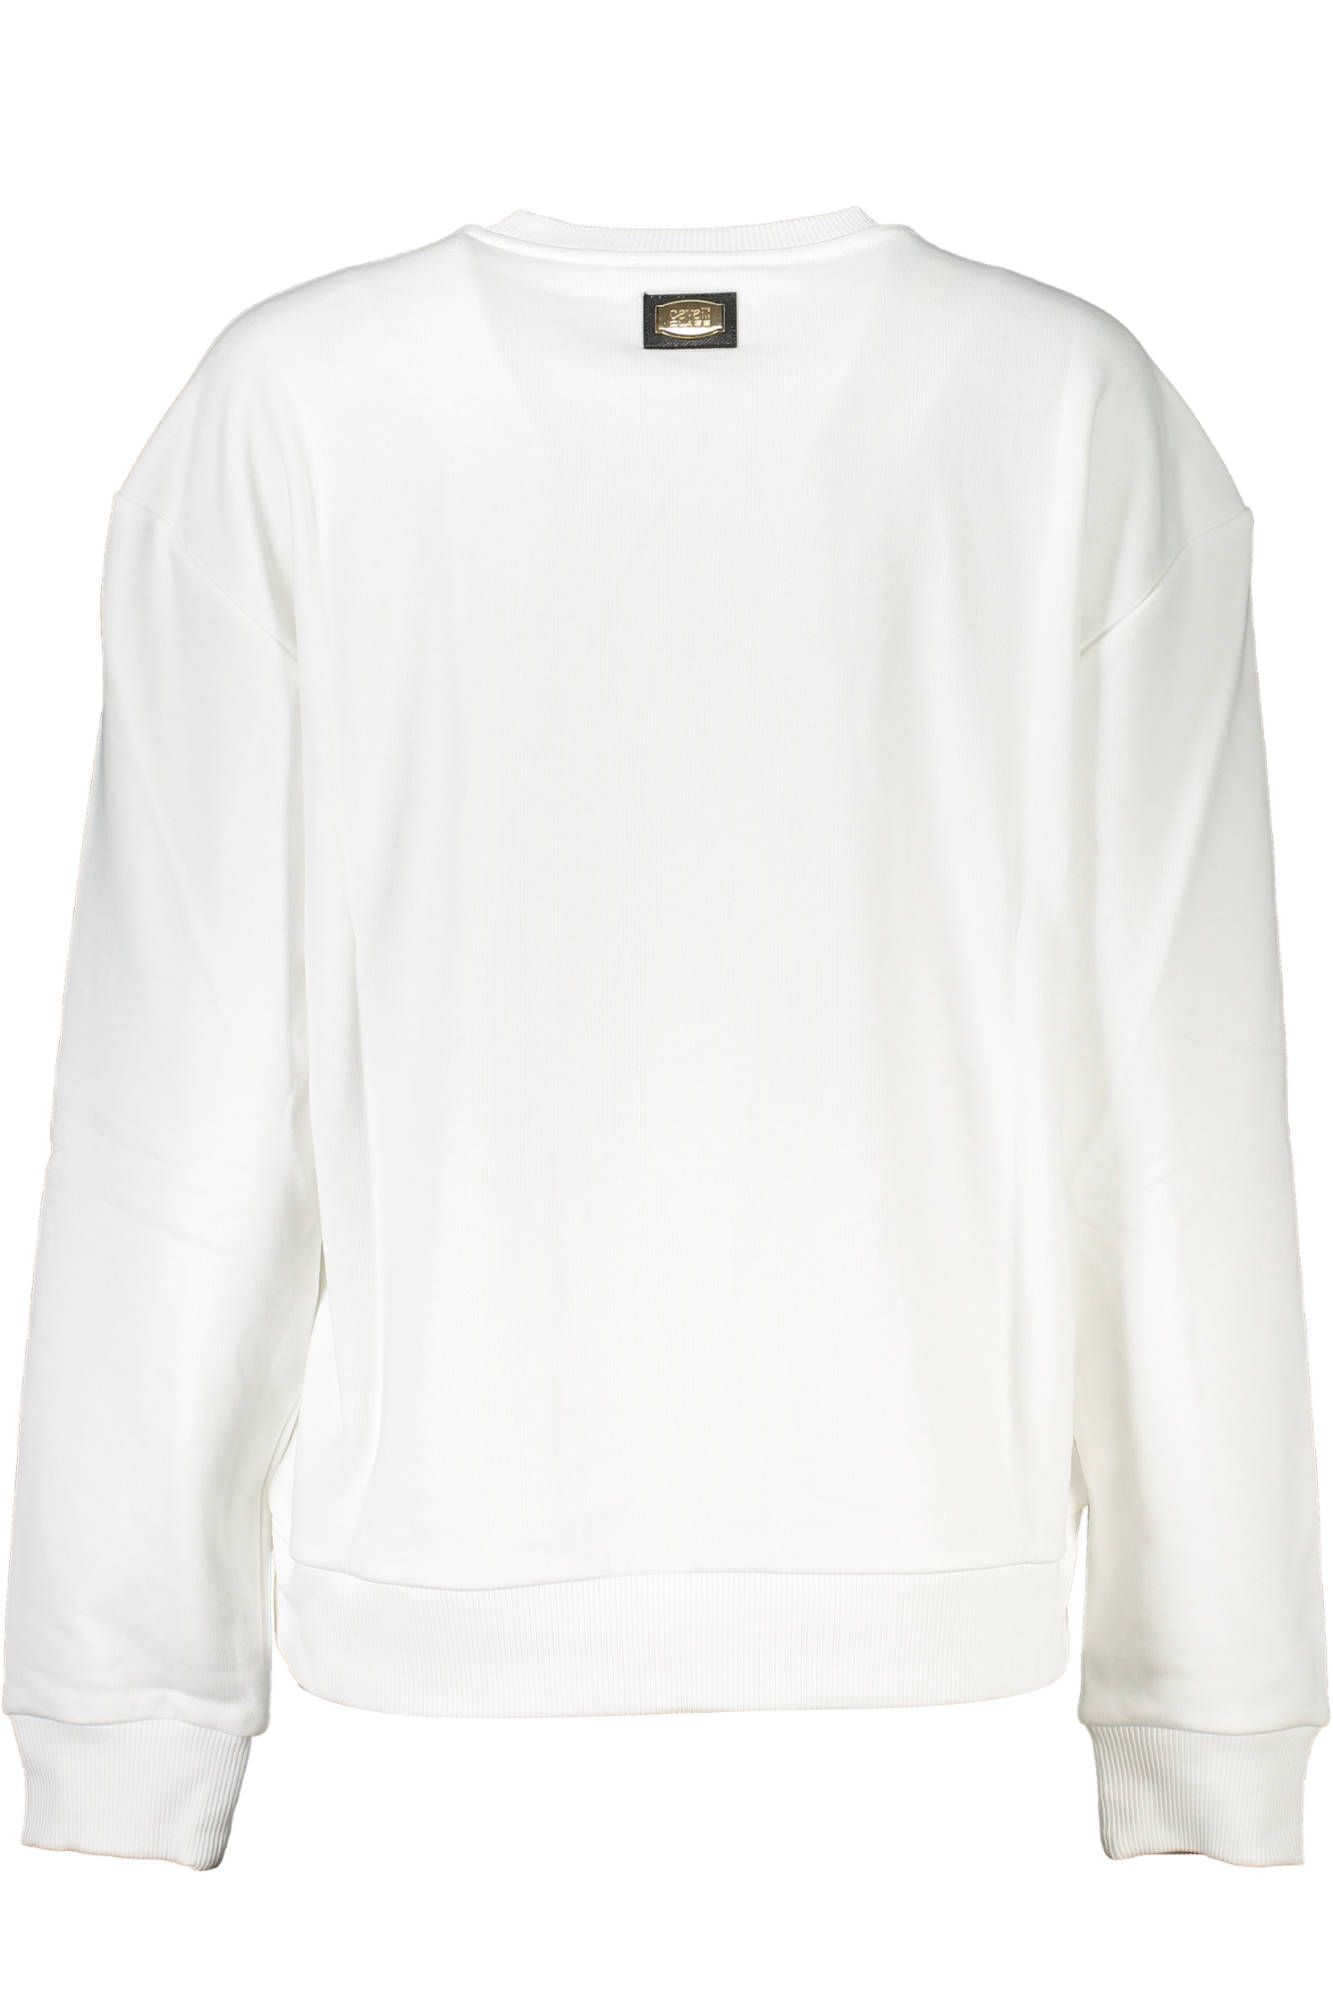 Chic White Printed Sweater with Cozy Brushed Interior